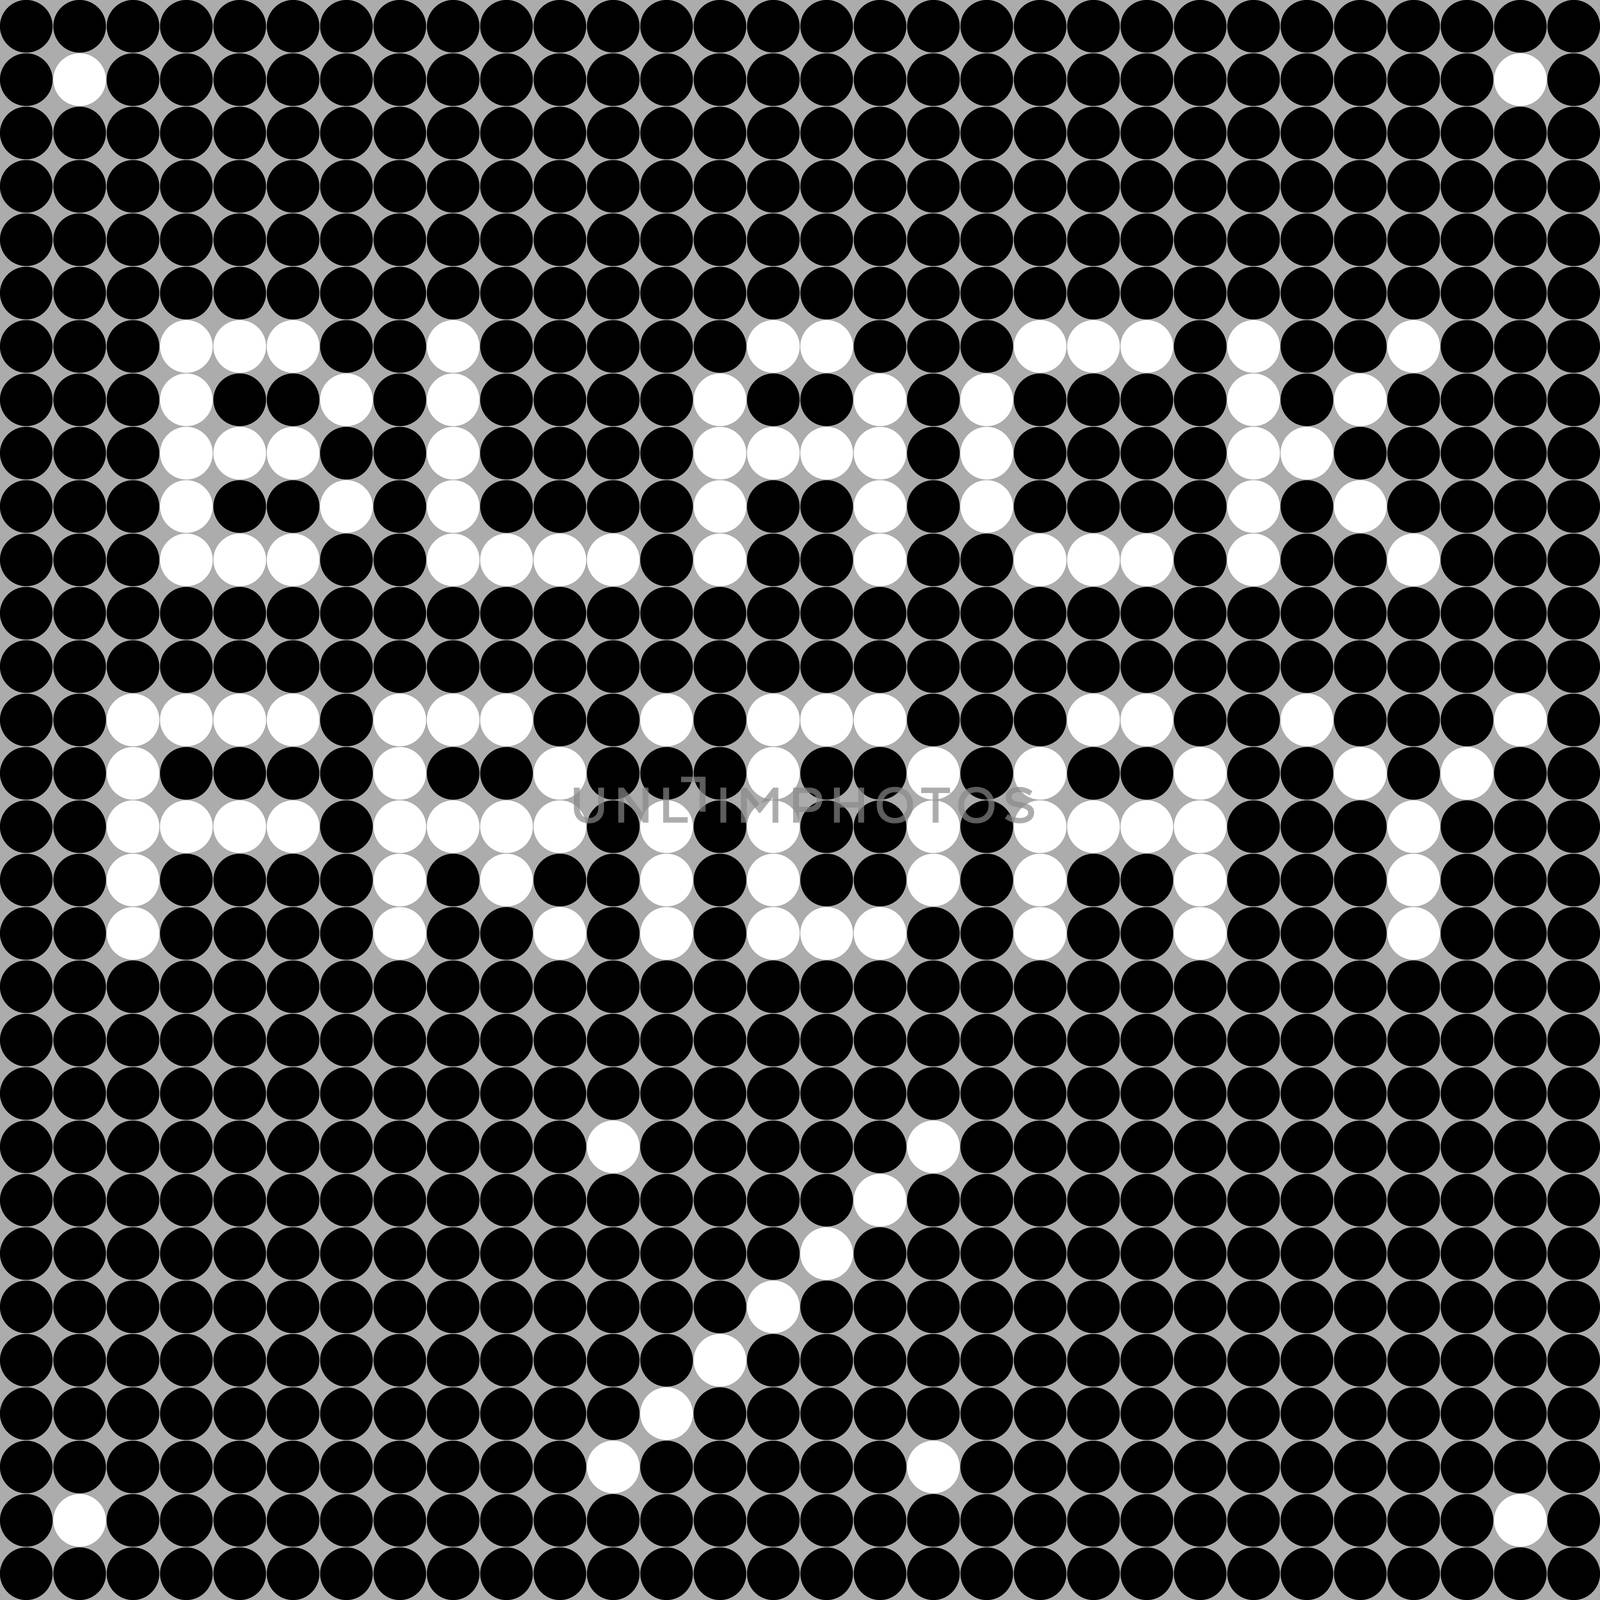 Black Friday card, pixel illustration of a scoreboard composition with digital text made of dots